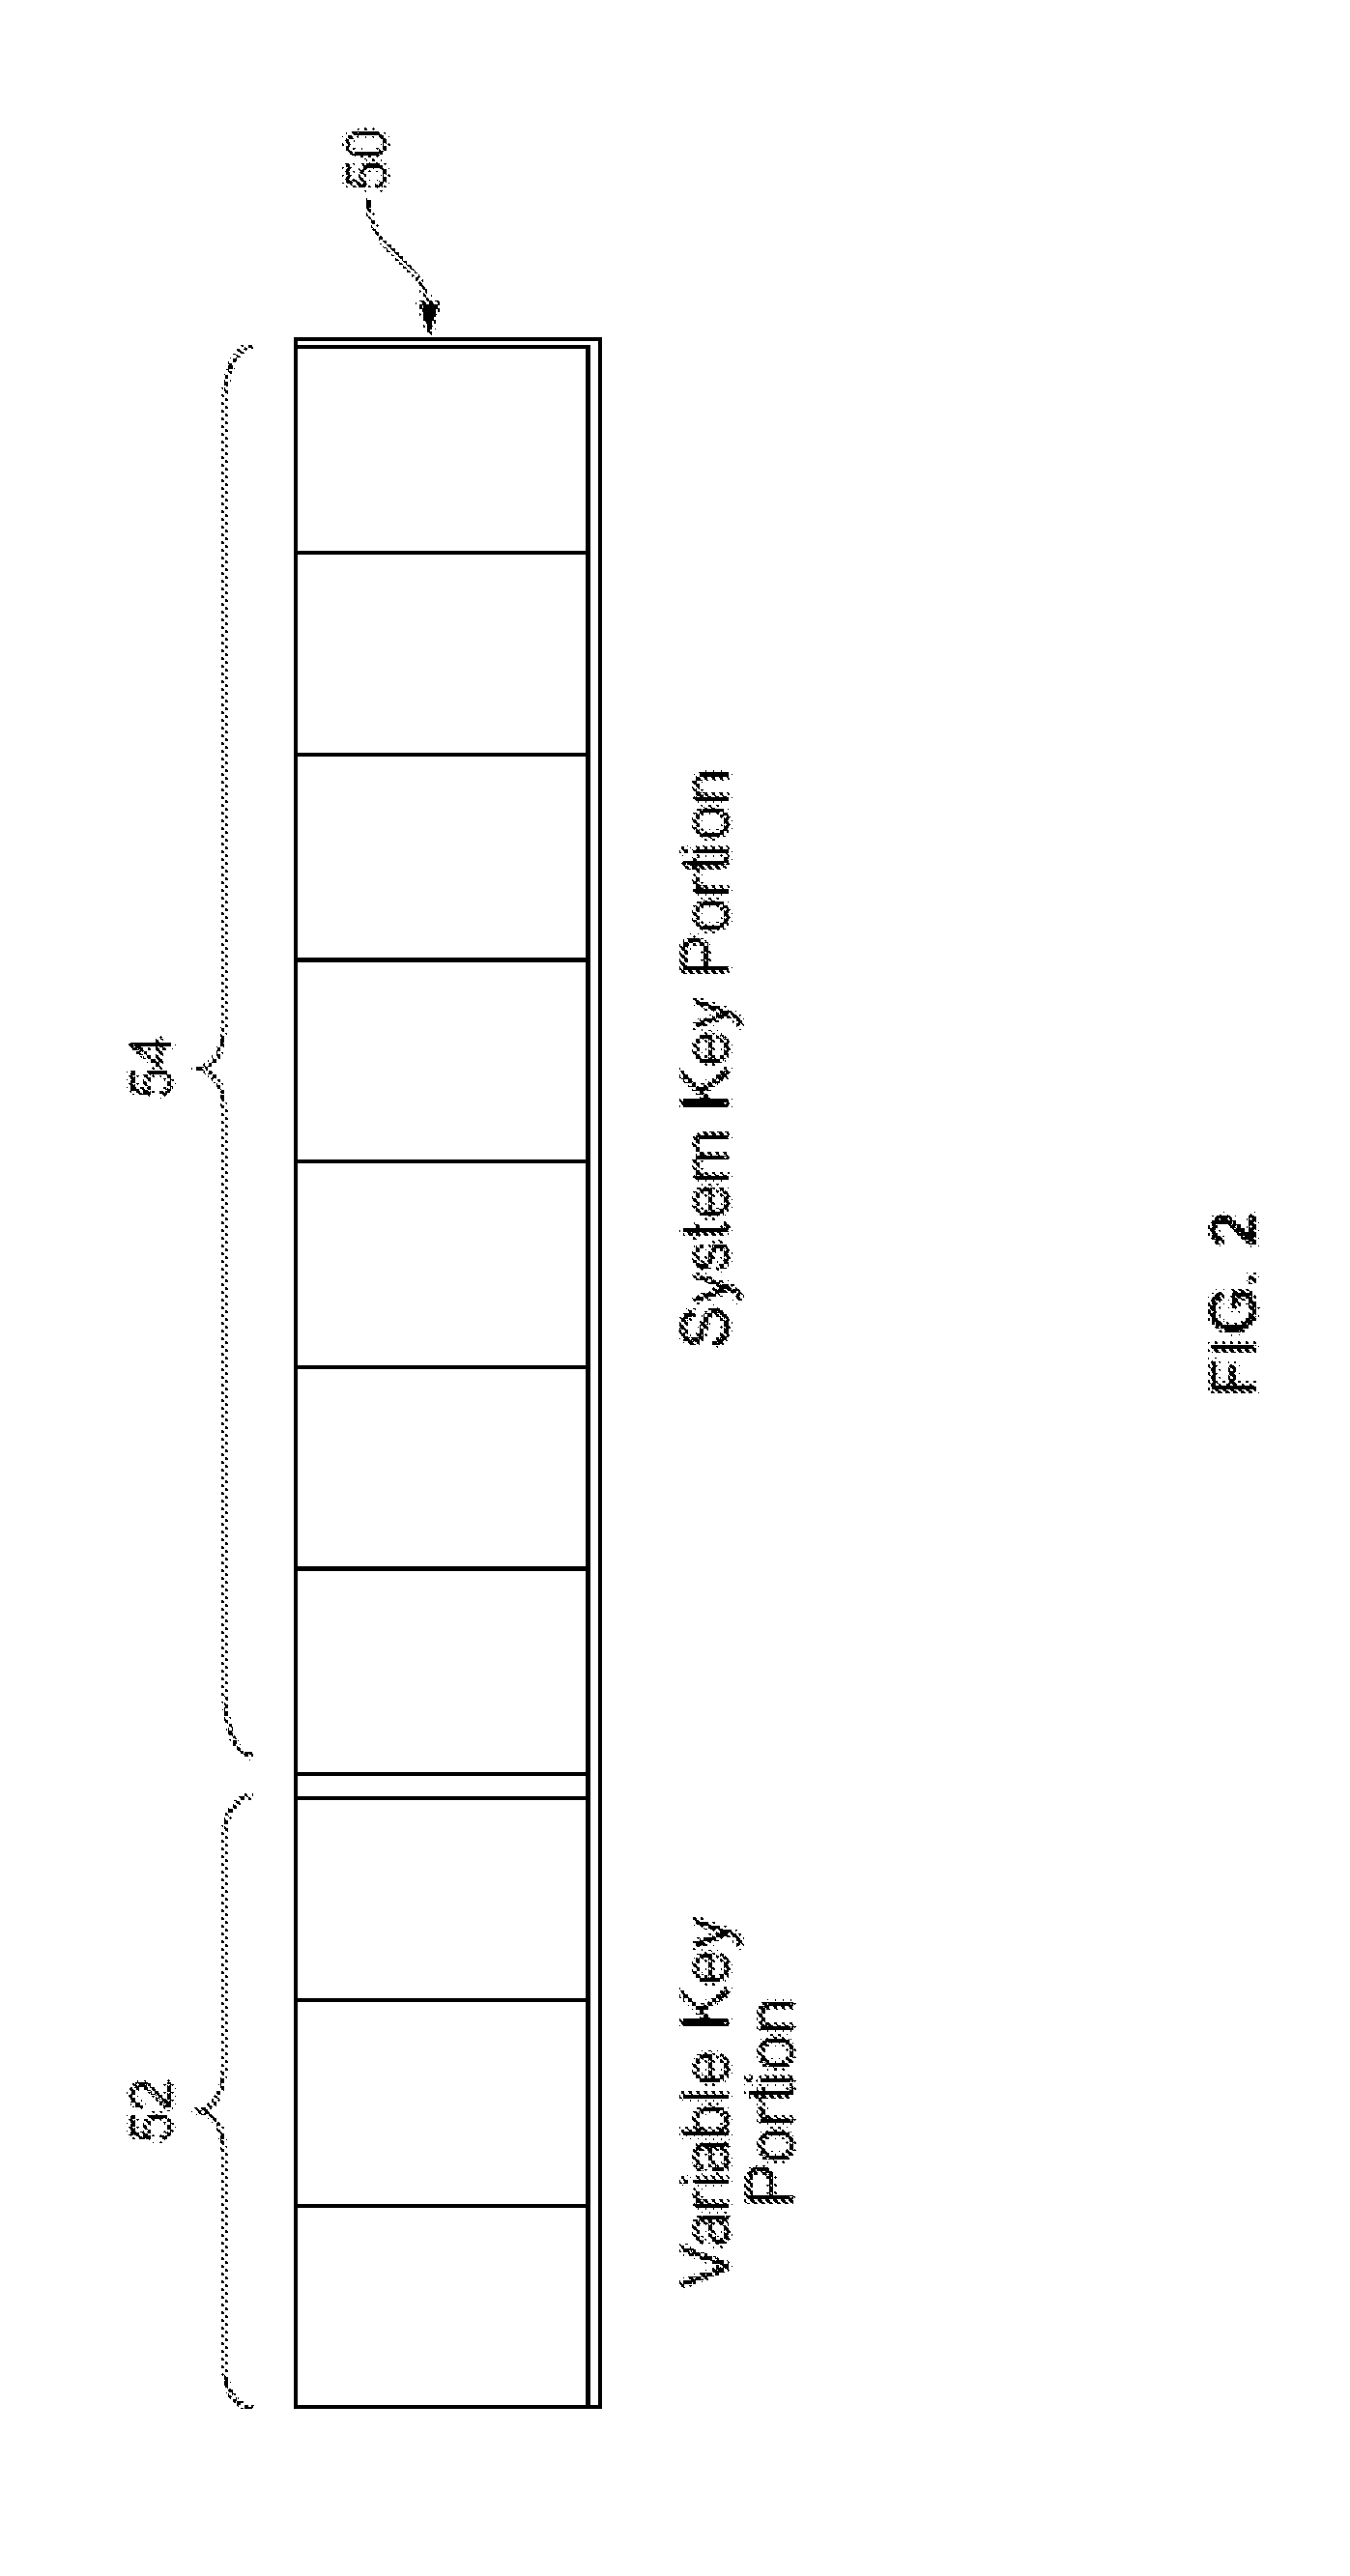 System and Method for Secured Communications by Embedded Platforms